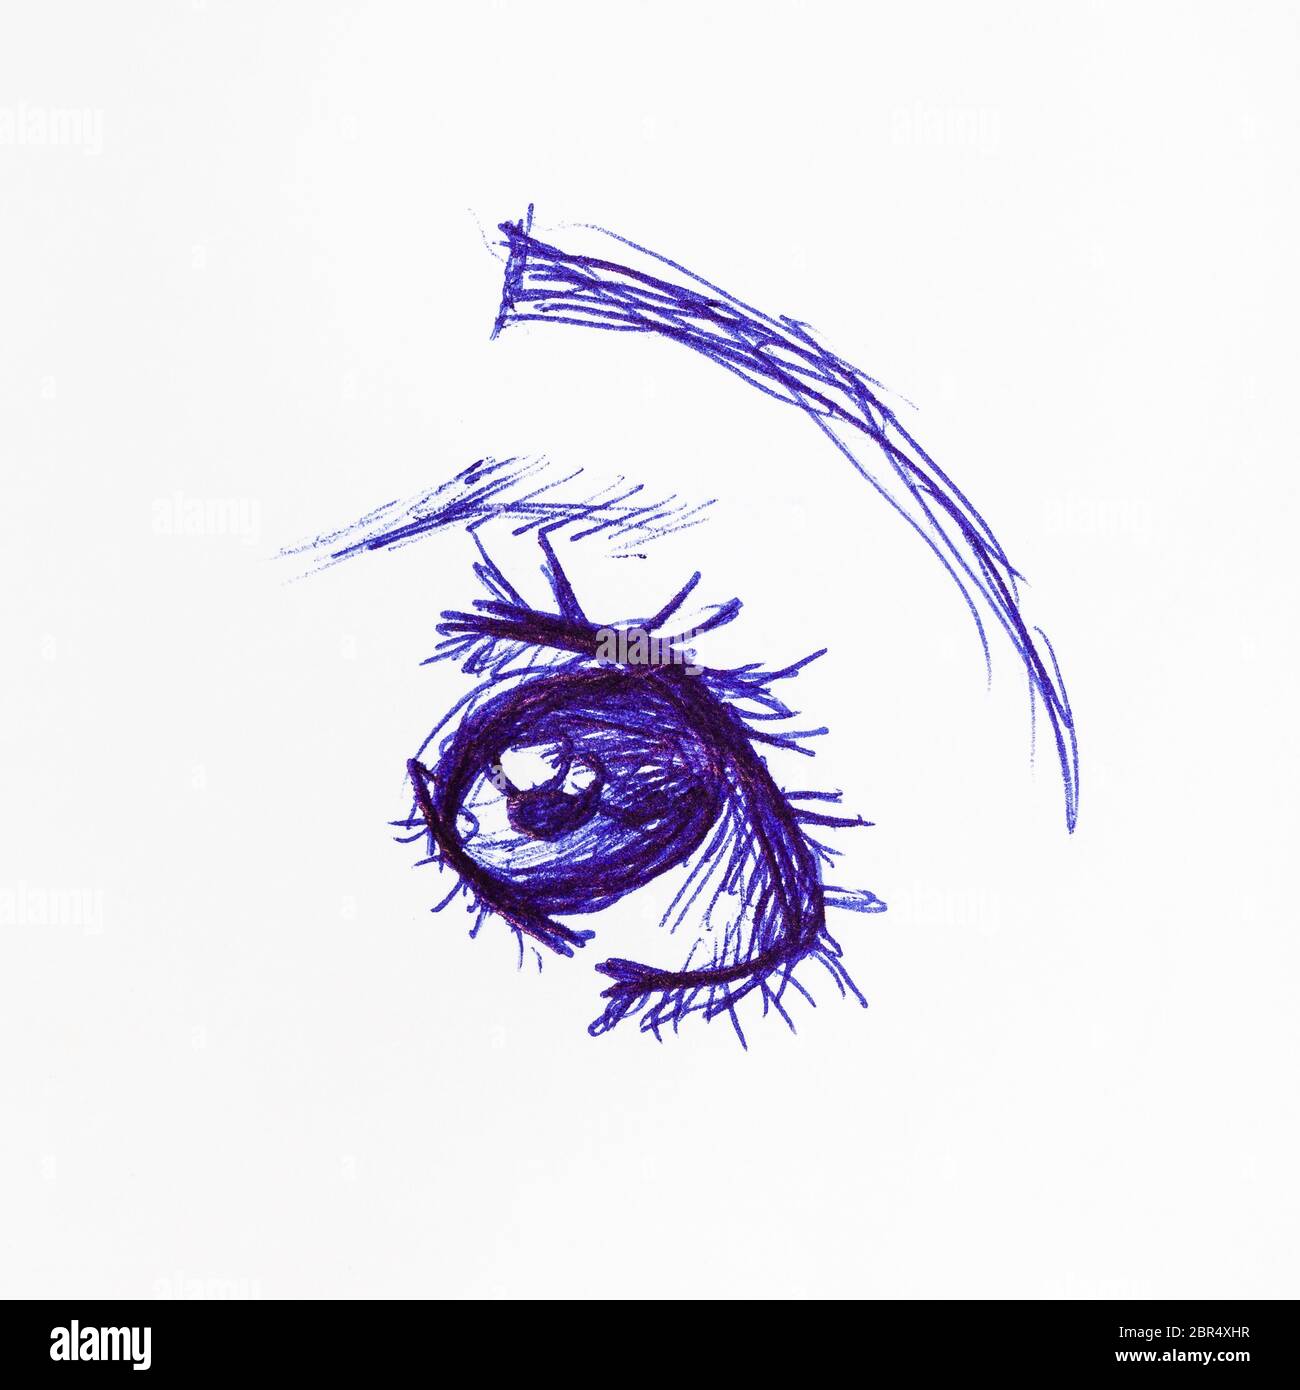 Easy Beginners Tutorial to draw an EYE using a ball Pen - Anyone can give  it a try ! - YouTube